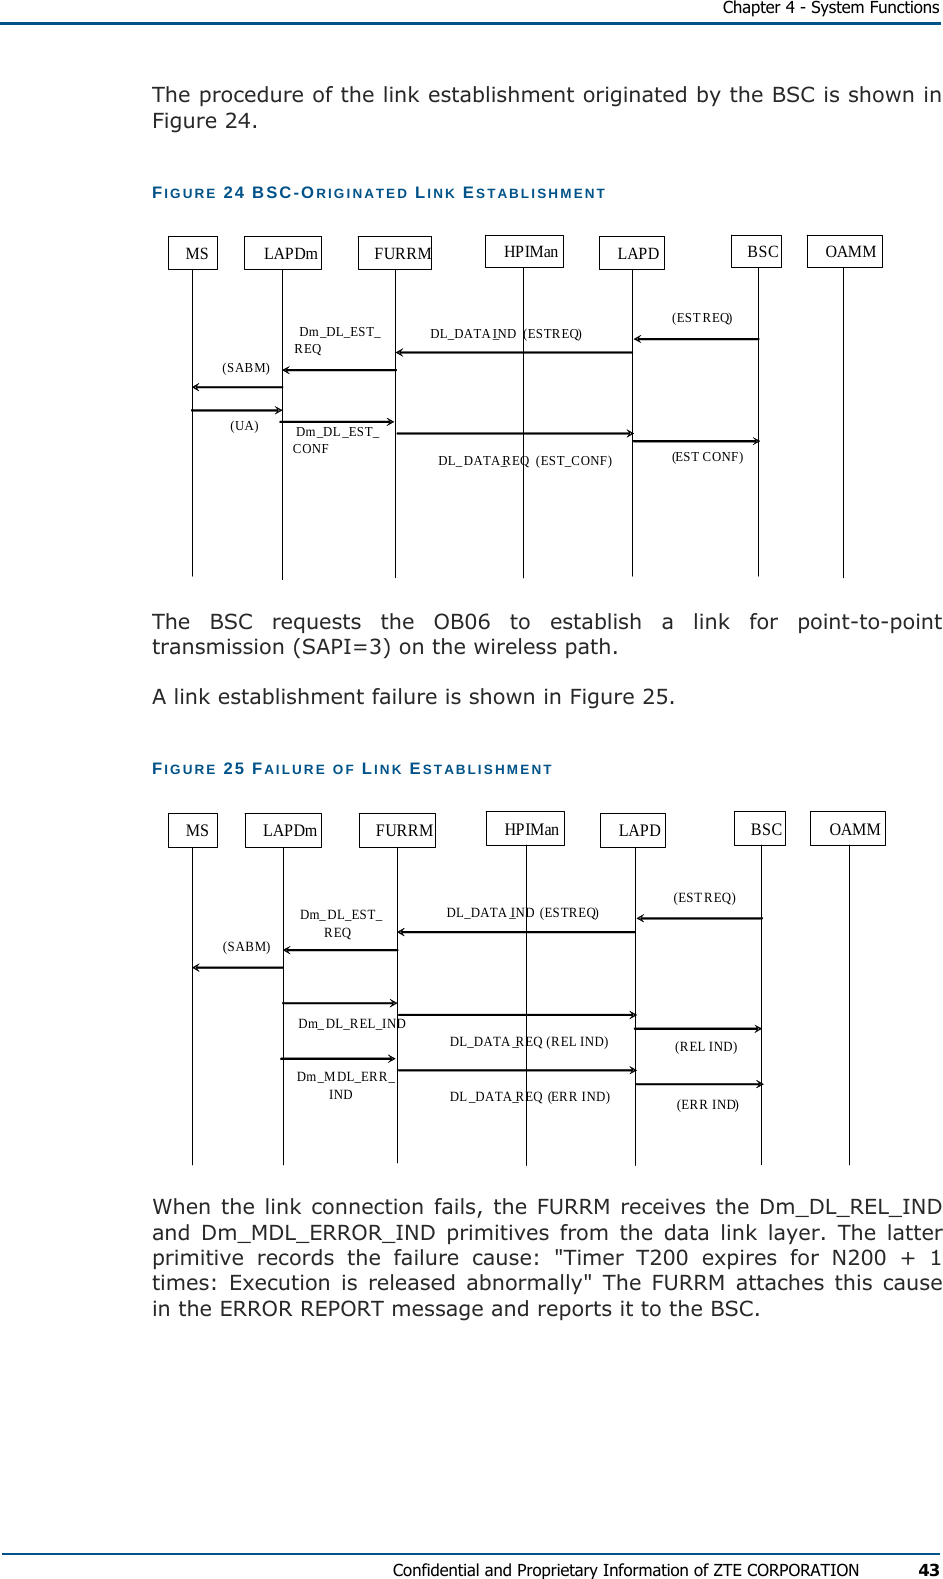   Chapter 4 - System Functions Confidential and Proprietary Information of ZTE CORPORATION 43 The procedure of the link establishment originated by the BSC is shown in Figure 24. FIGURE 24 BSC-ORIGINATED LINK ESTABLISHMENT MS LAPDm FURRM HPIMan LAPD BSC OAMMDm_DL_EST_REQ DL_DATA_IND  (EST REQ) (EST REQ)(SABM)(UA) Dm_DL_EST_CONF DL_DATA_REQ  (EST_CONF) (EST CONF)  The BSC requests the OB06 to establish a link for point-to-point transmission (SAPI=3) on the wireless path. A link establishment failure is shown in Figure 25. FIGURE 25 FAILURE OF LINK ESTABLISHMENT MS LAPDm FURRM HPIMan LAPD BSC OAMMDm_DL_EST_REQDL_DATA_IND (EST REQ) (EST REQ) (SABM)Dm_DL_REL_IND DL_DATA_REQ (REL IND) (REL IND) Dm_MDL_ERR_IND (ERR IND) DL_DATA_REQ (ERR IND) When the link connection fails, the FURRM receives the Dm_DL_REL_IND and Dm_MDL_ERROR_IND primitives from the data link layer. The latter primitive records the failure cause: &quot;Timer T200 expires for N200 + 1 times: Execution is released abnormally&quot; The FURRM attaches this cause in the ERROR REPORT message and reports it to the BSC. 